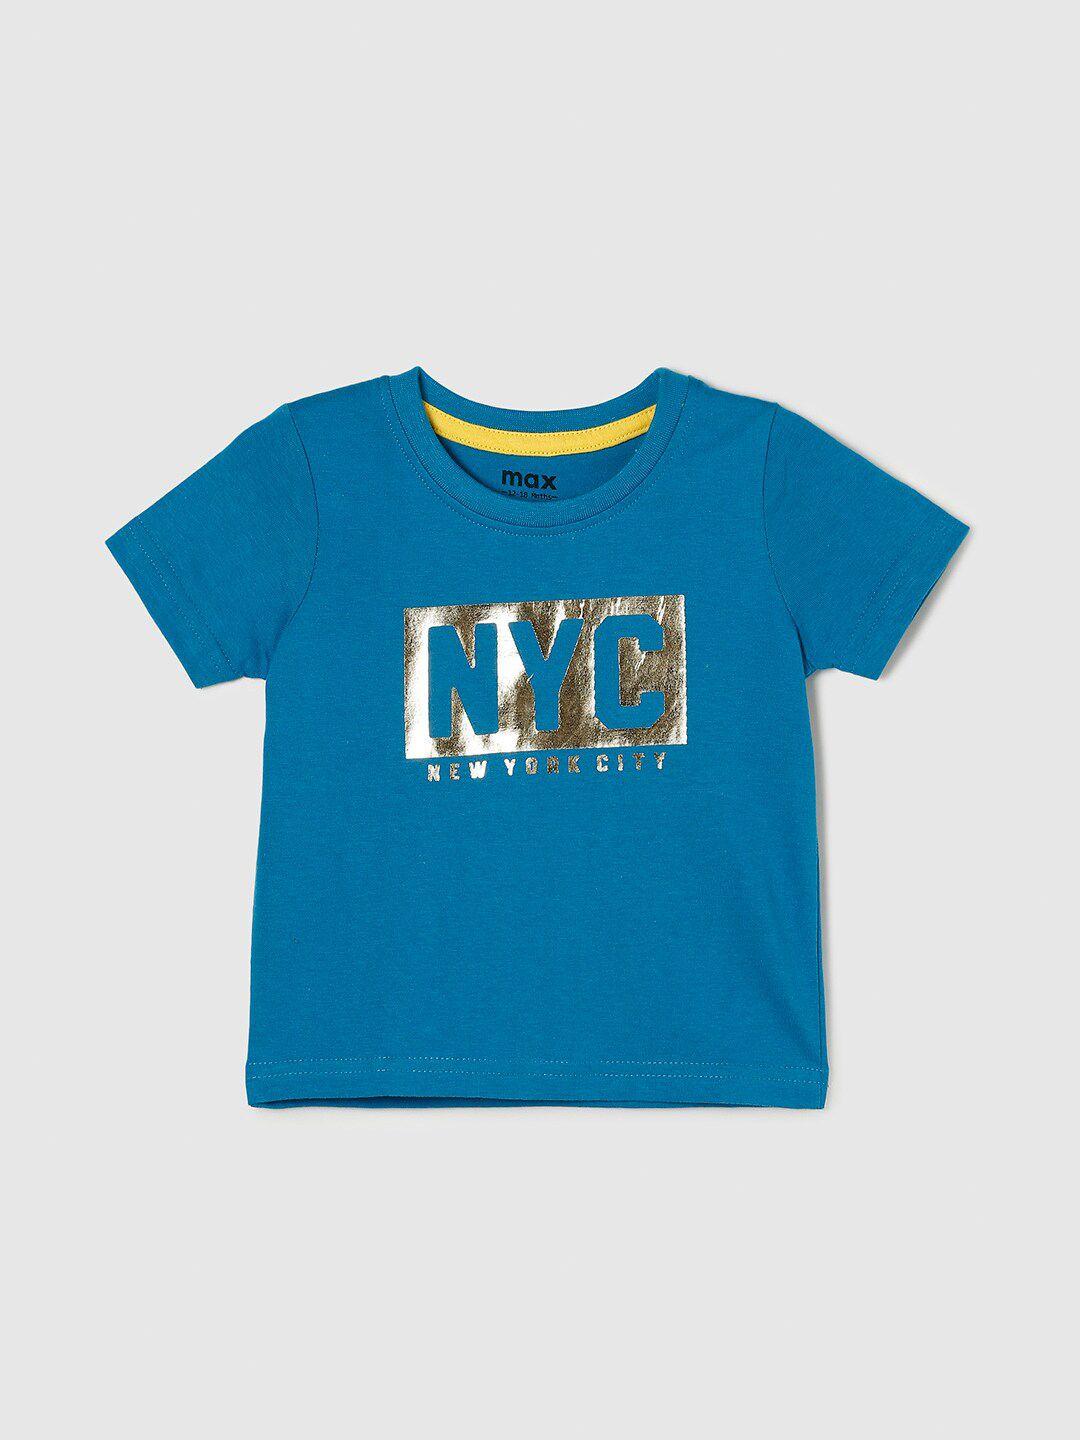 max Boys Teal Blue Typography Printed Applique T-shirt